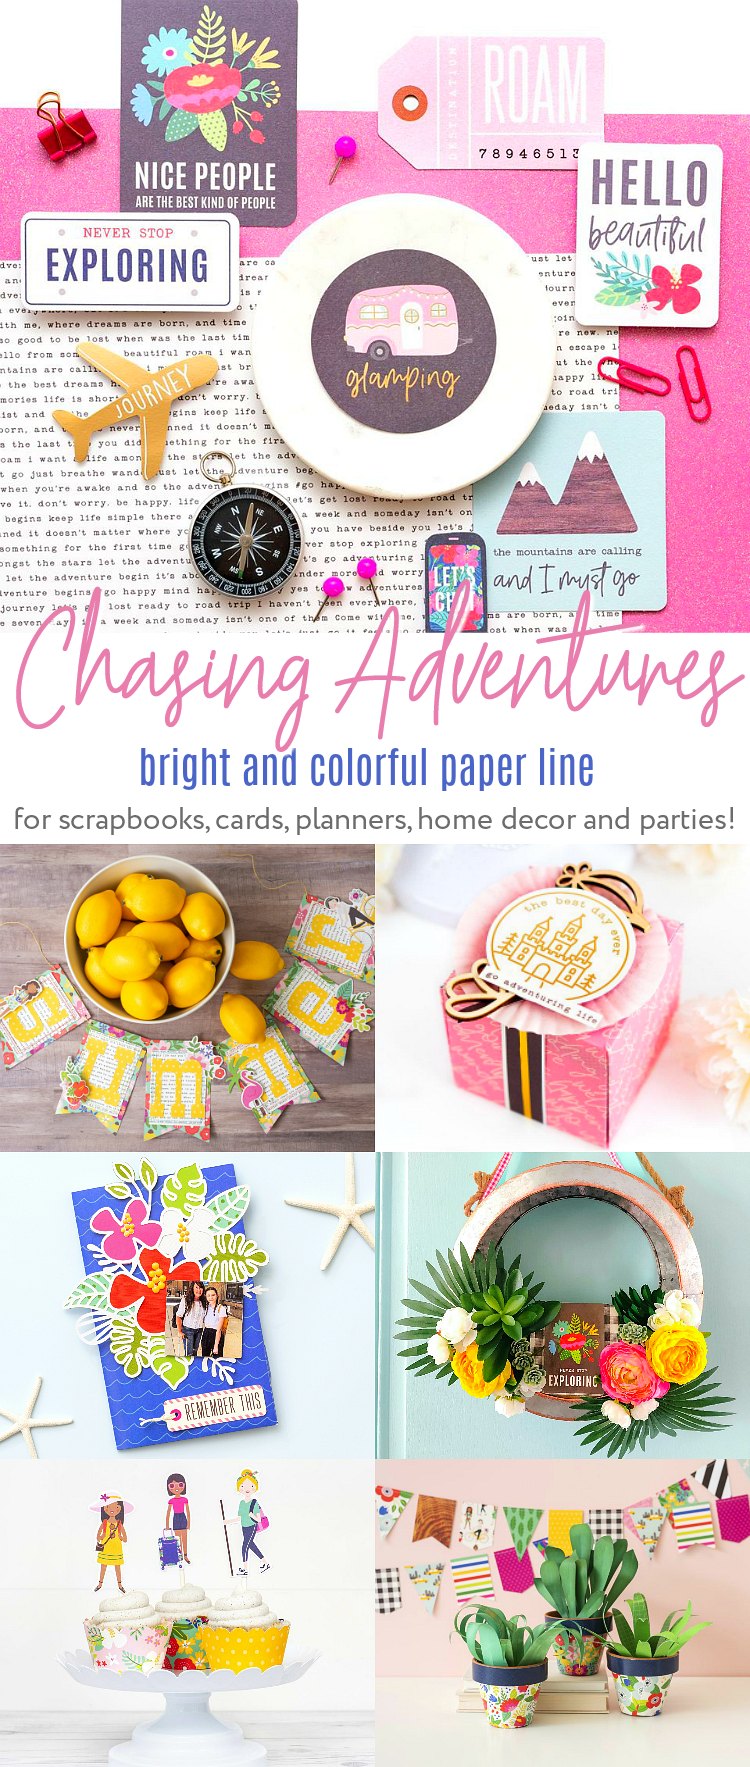 Chasing Adventures Bright and Colorful Paper line is now in Spotlight Stores in Australia! Record special moments and adventures both near and far!